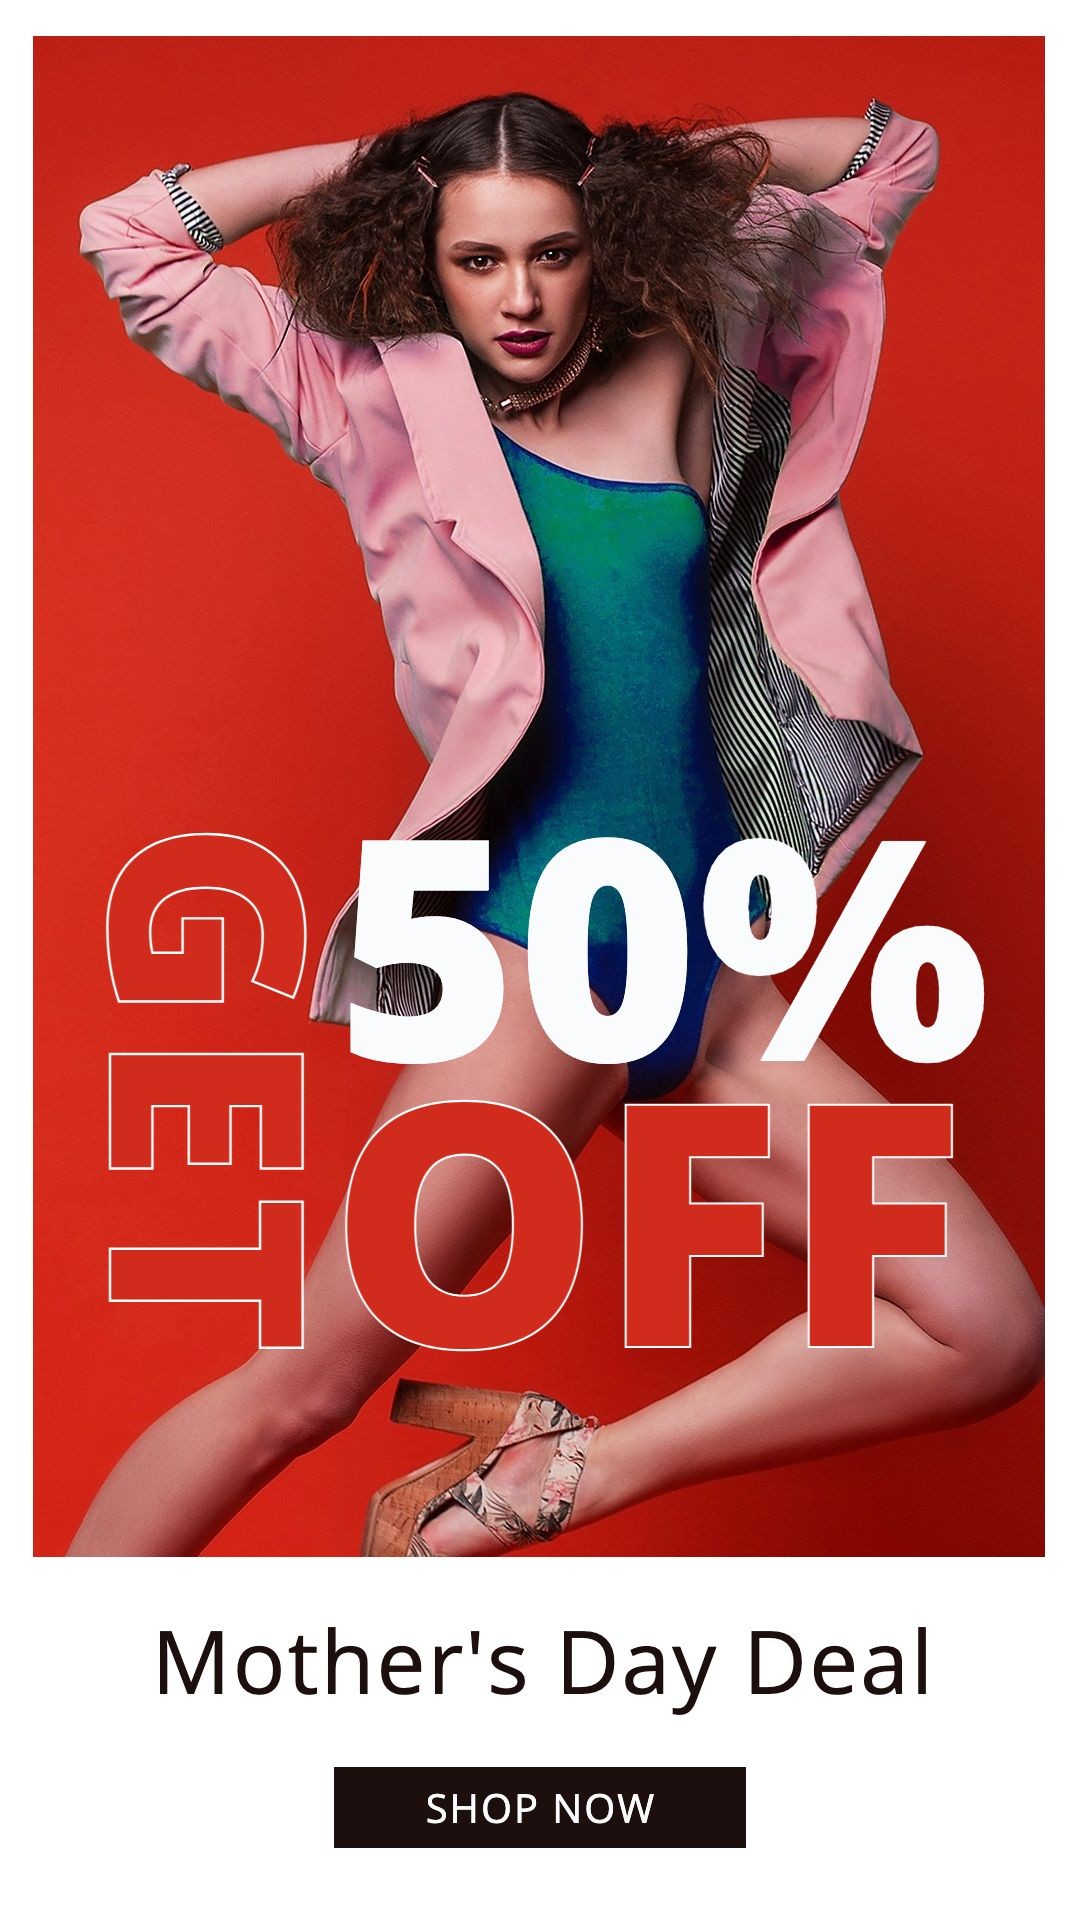 Jump Girl Mother's Day Women's Fahion Sale Promotion Ecommerce Story预览效果